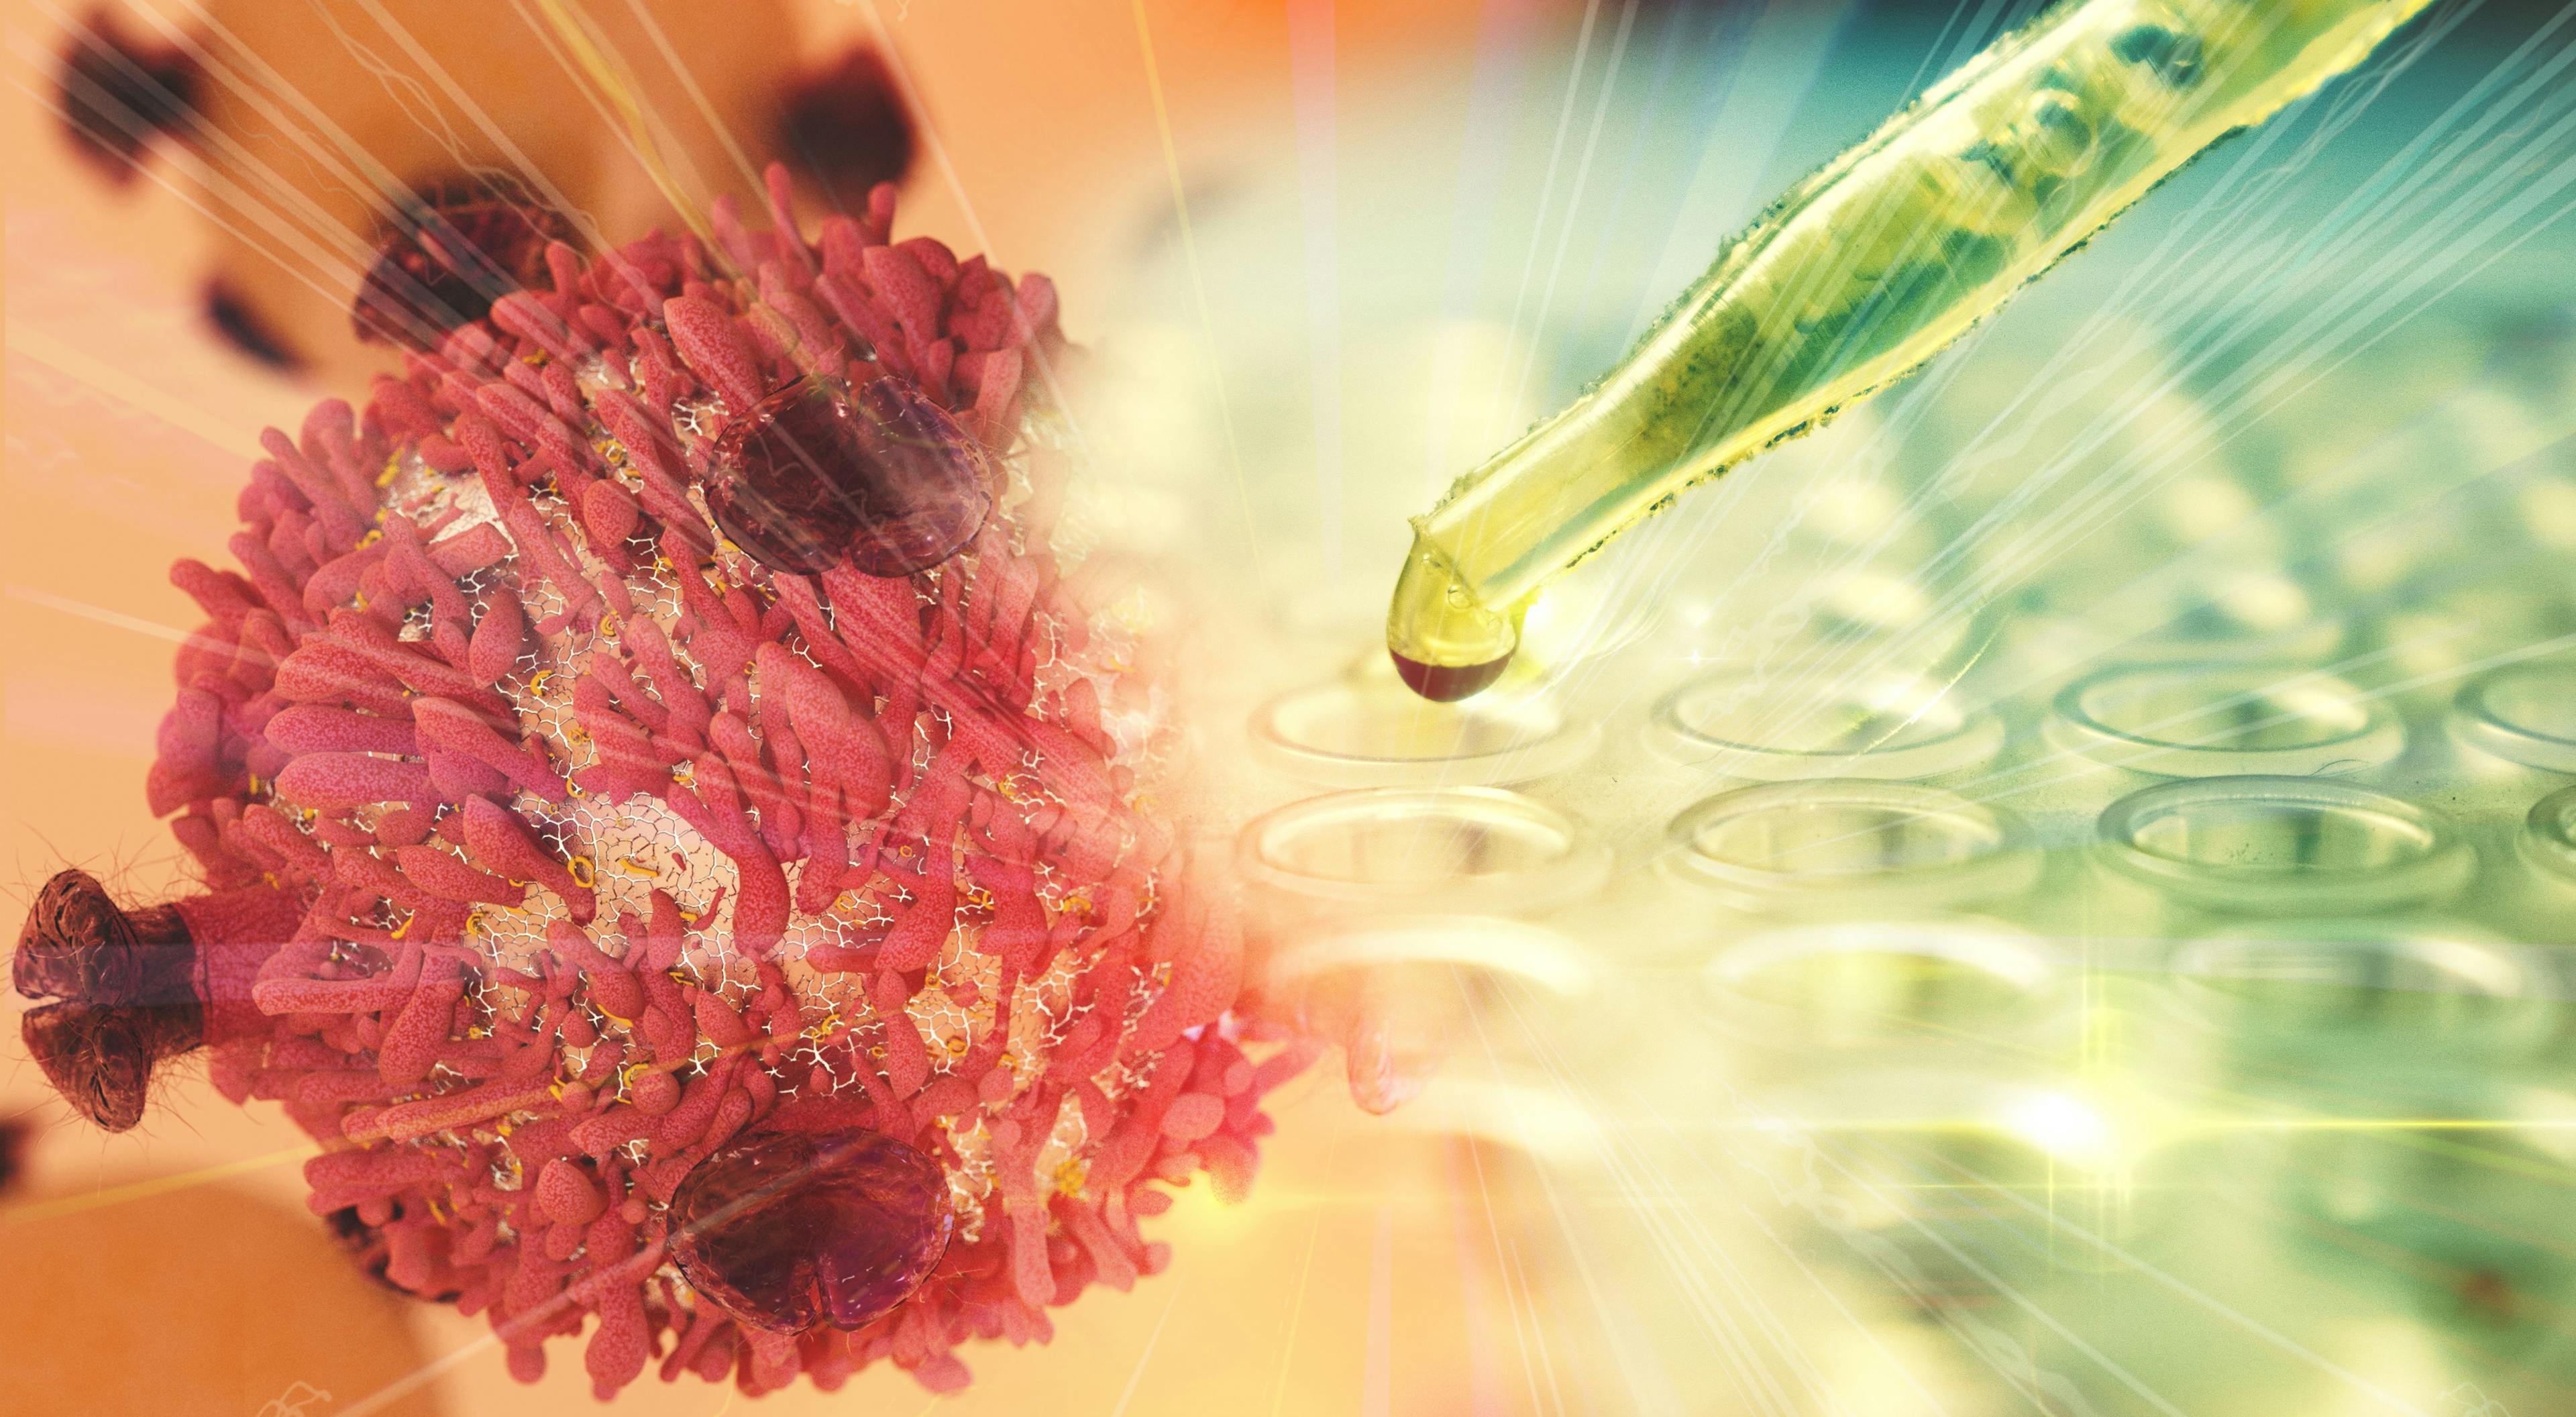 Immunotherapy May Mean No Chemotherapy for Some With Metastatic Head and Neck Cancer